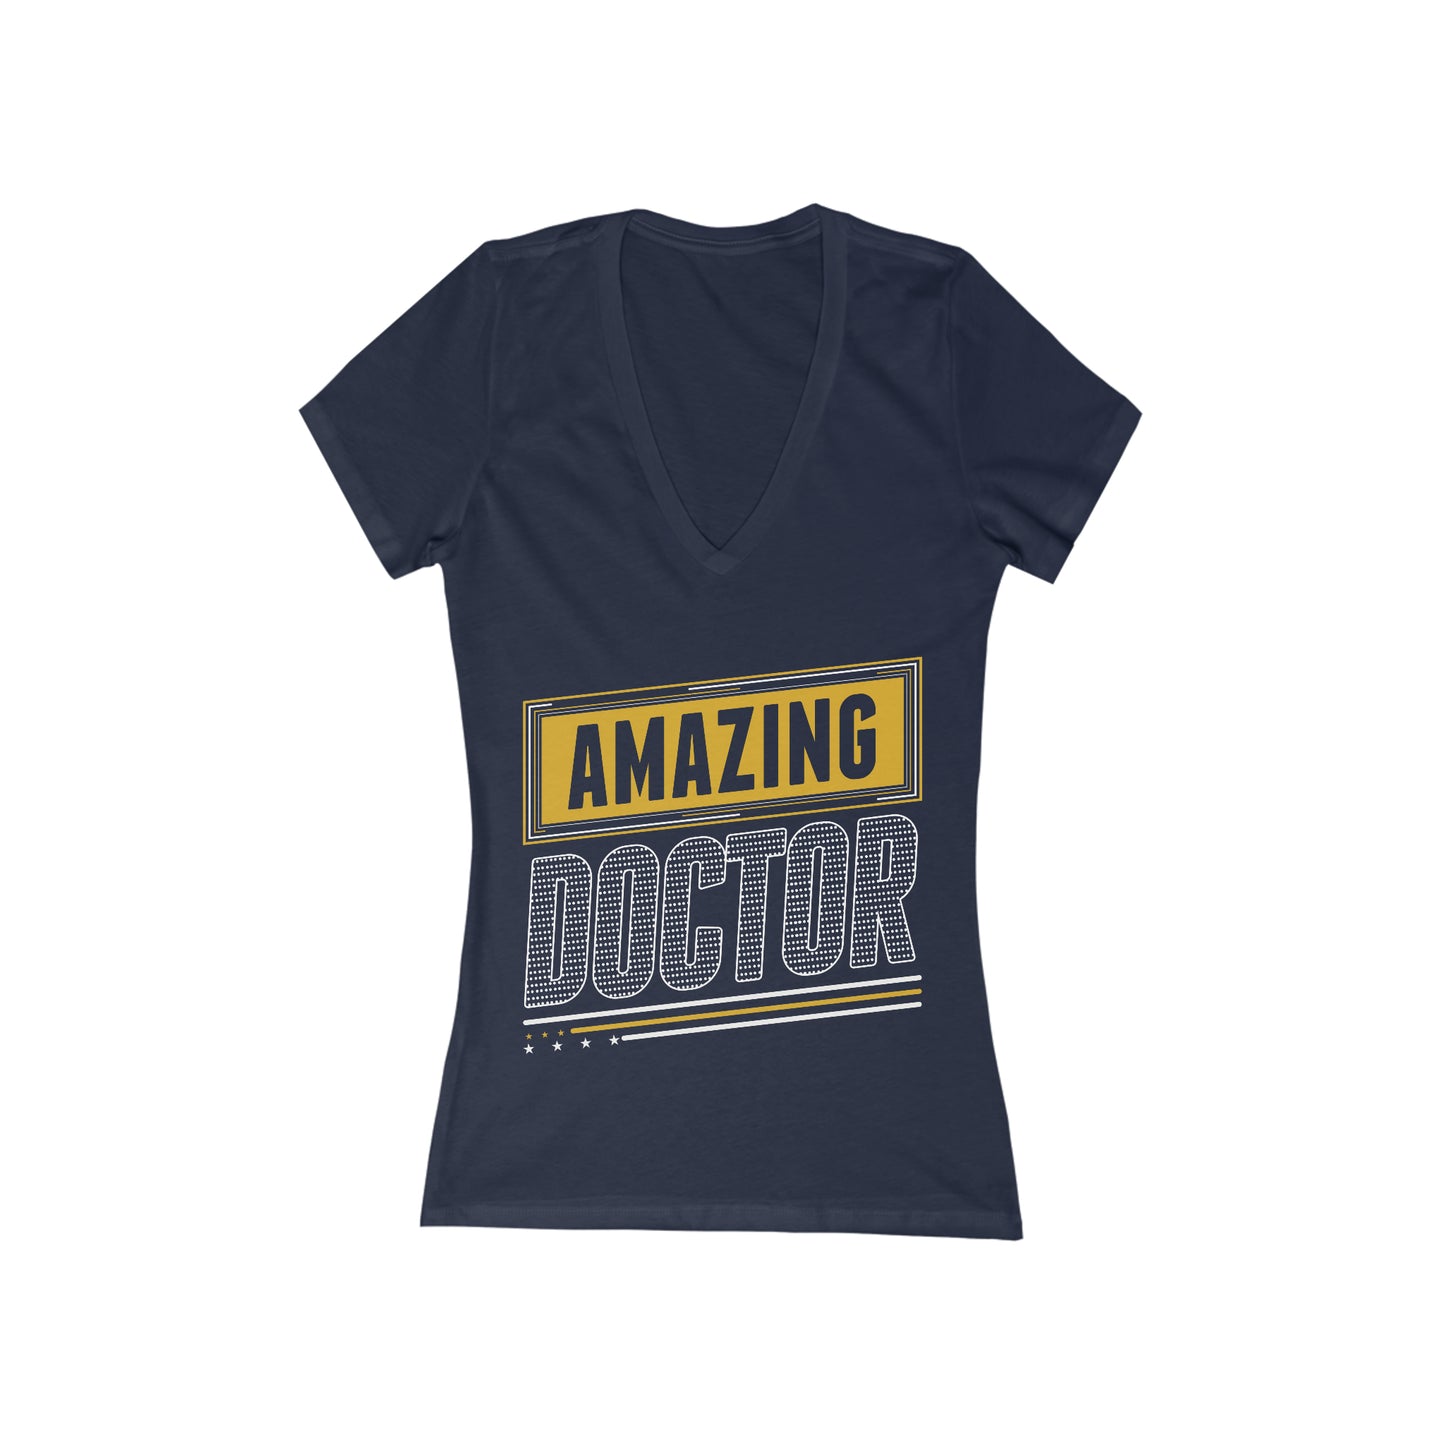 Amazing Doctor Women's Short Sleeve V-Neck Tee, Doctor shirts, Doctor gift ideas, gift for doctors, women shirt with doctor design